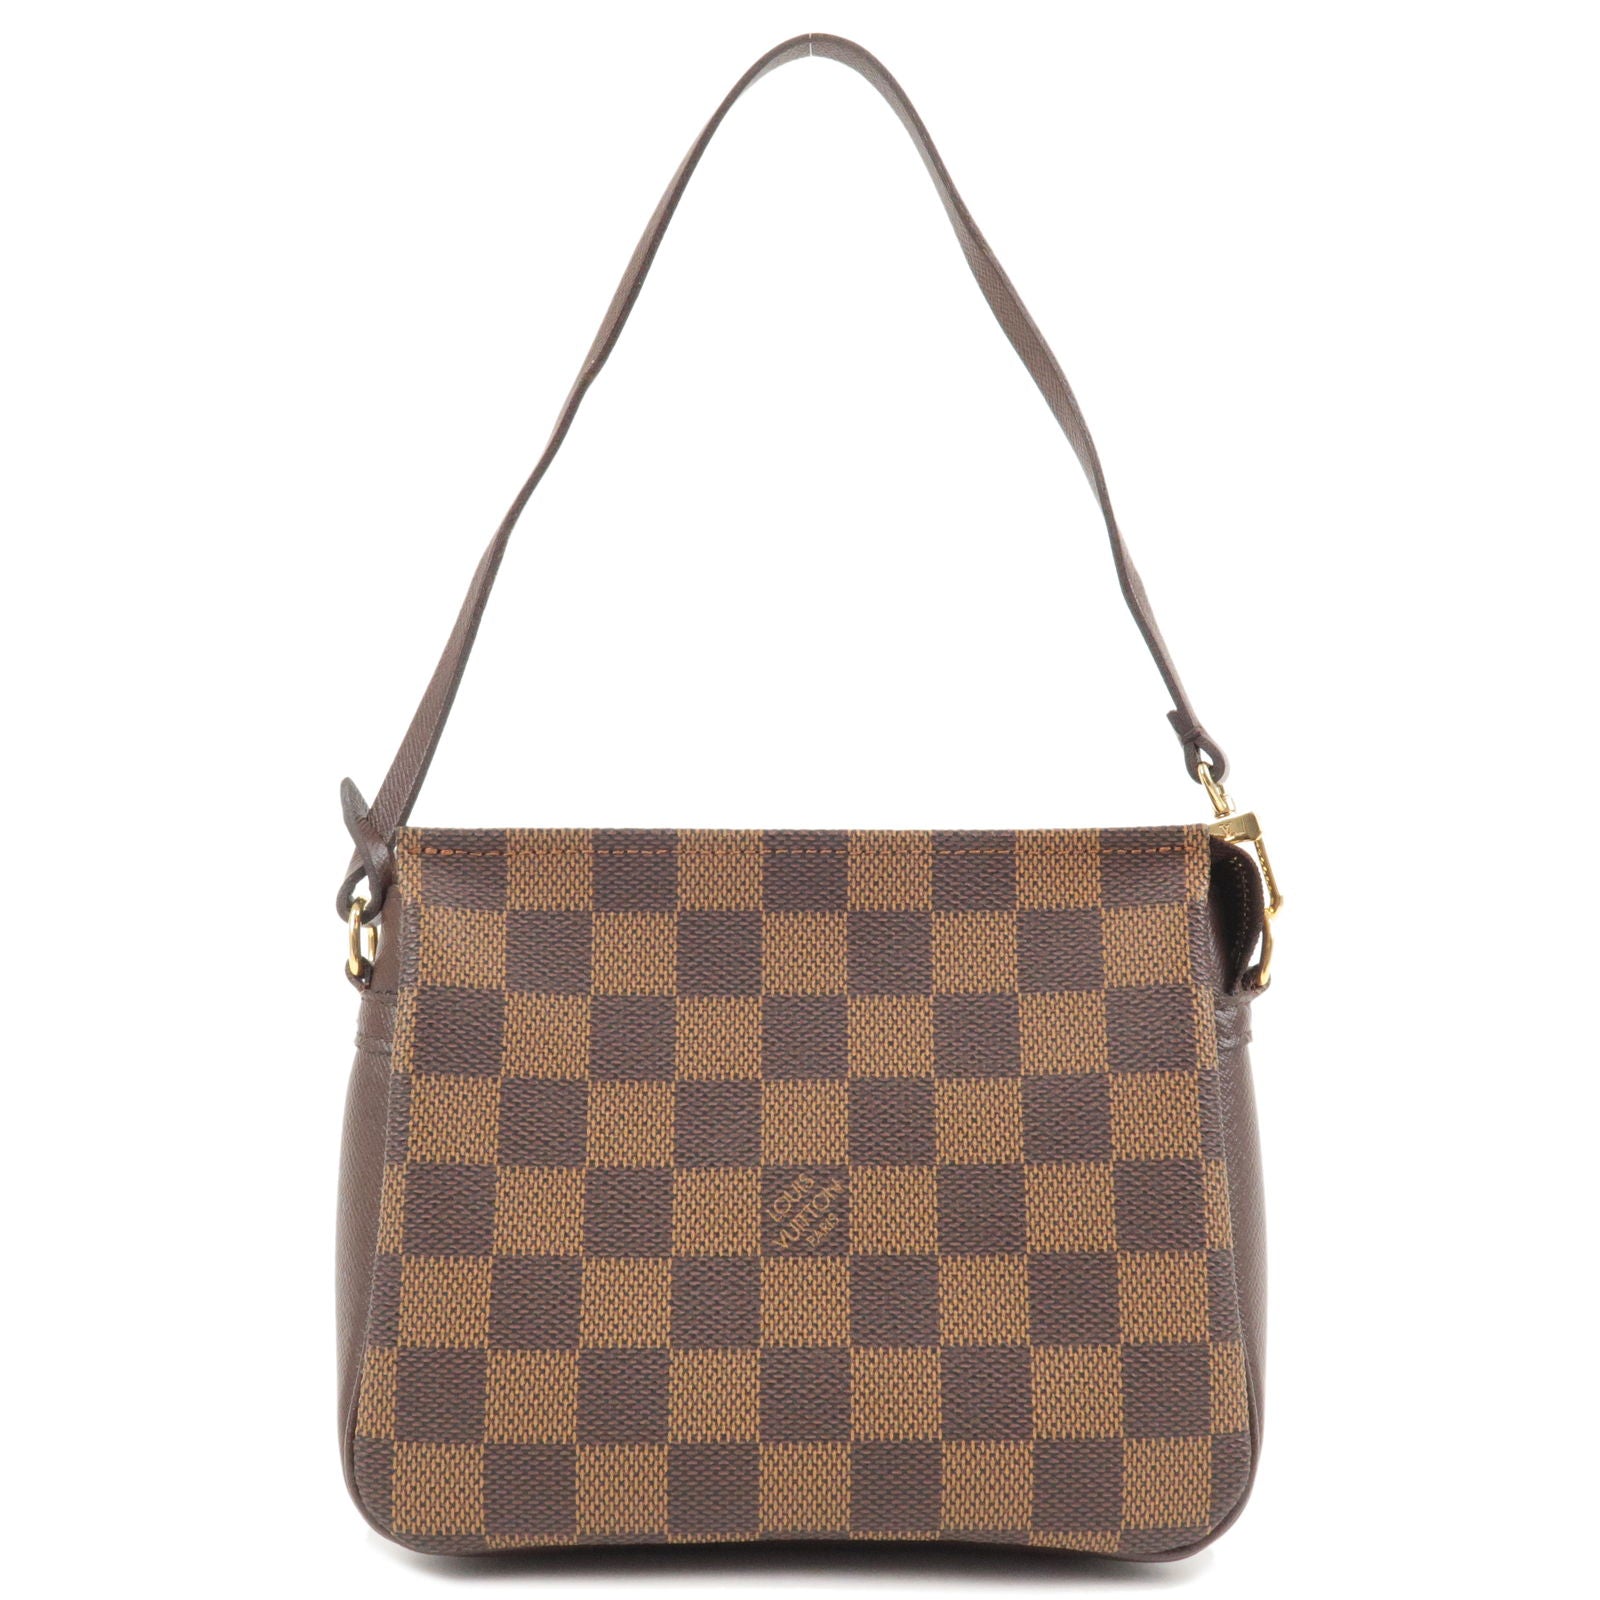 Like New! NEVER USED Louis Vuitton Monogram Damier Azur Cosmetic